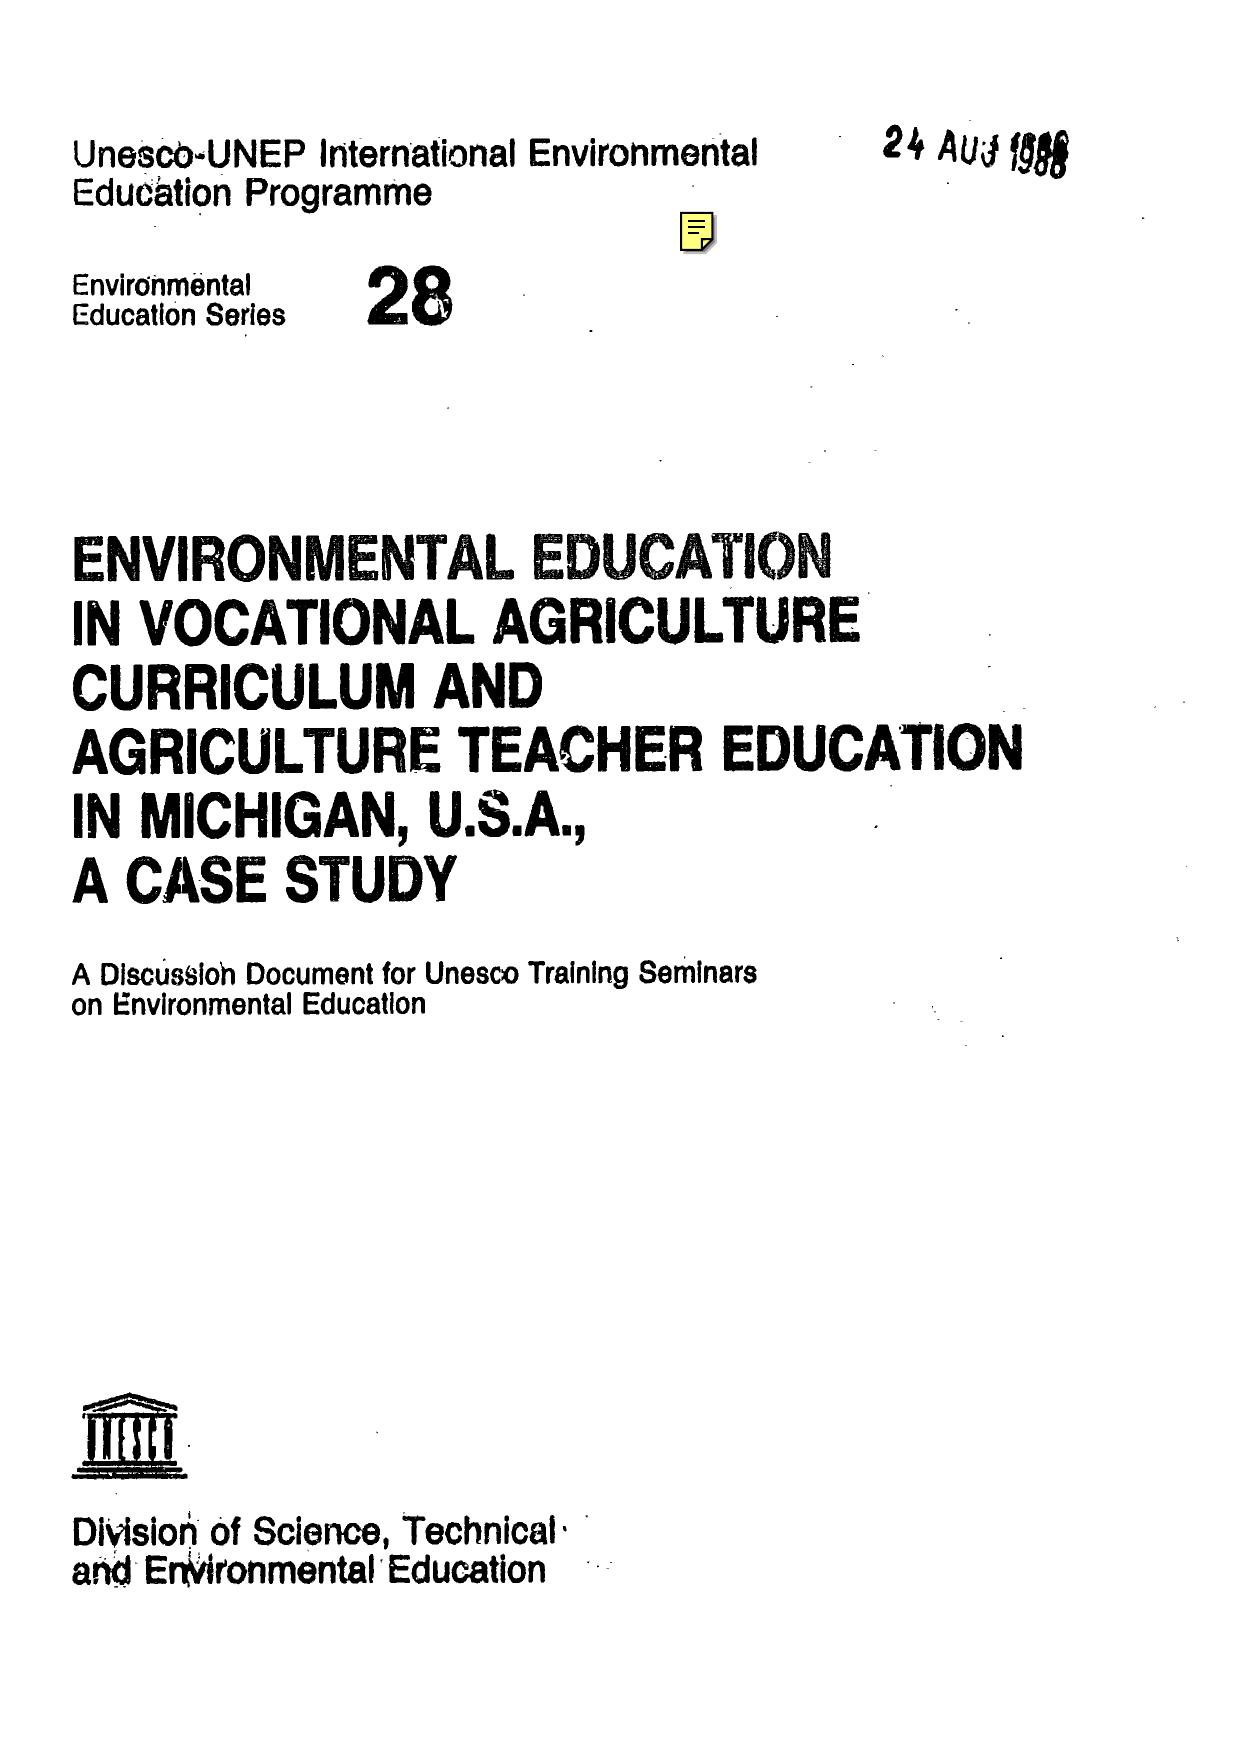 Environmental education in vocational agriculture curriculum and agriculture teacher education in Michigan, U.S.A.; a case study; Environmental education series; Vol.:28; 1988